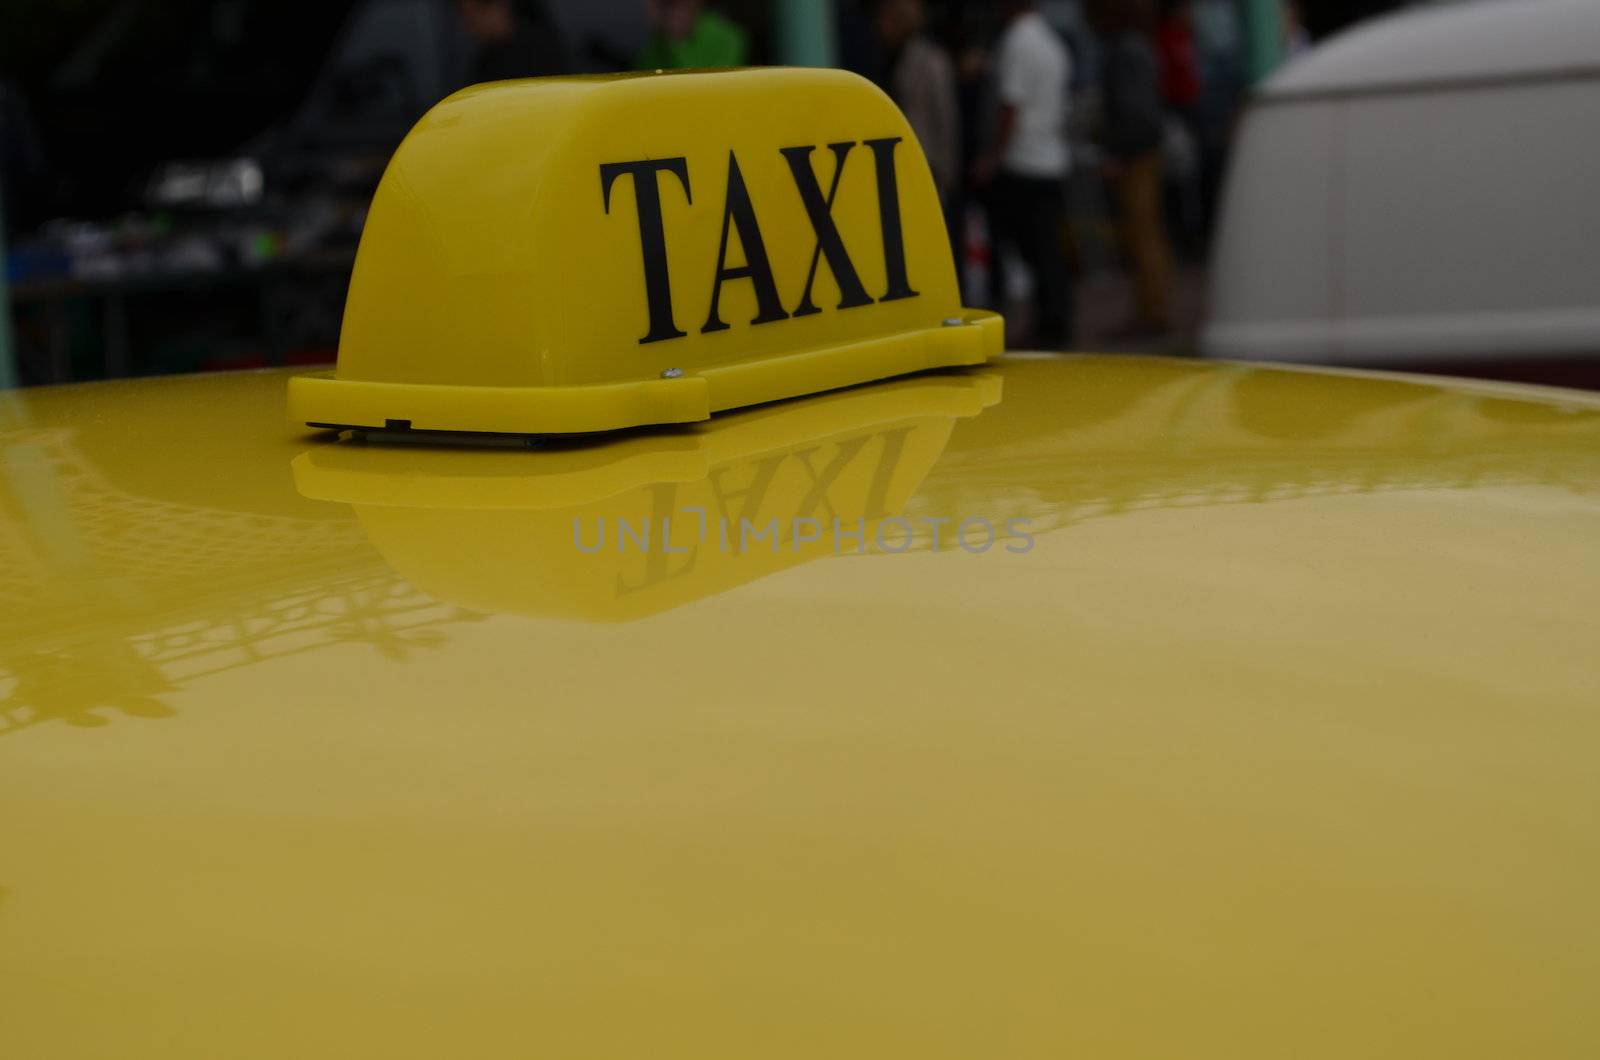 Taxi cab roof sign by bunsview